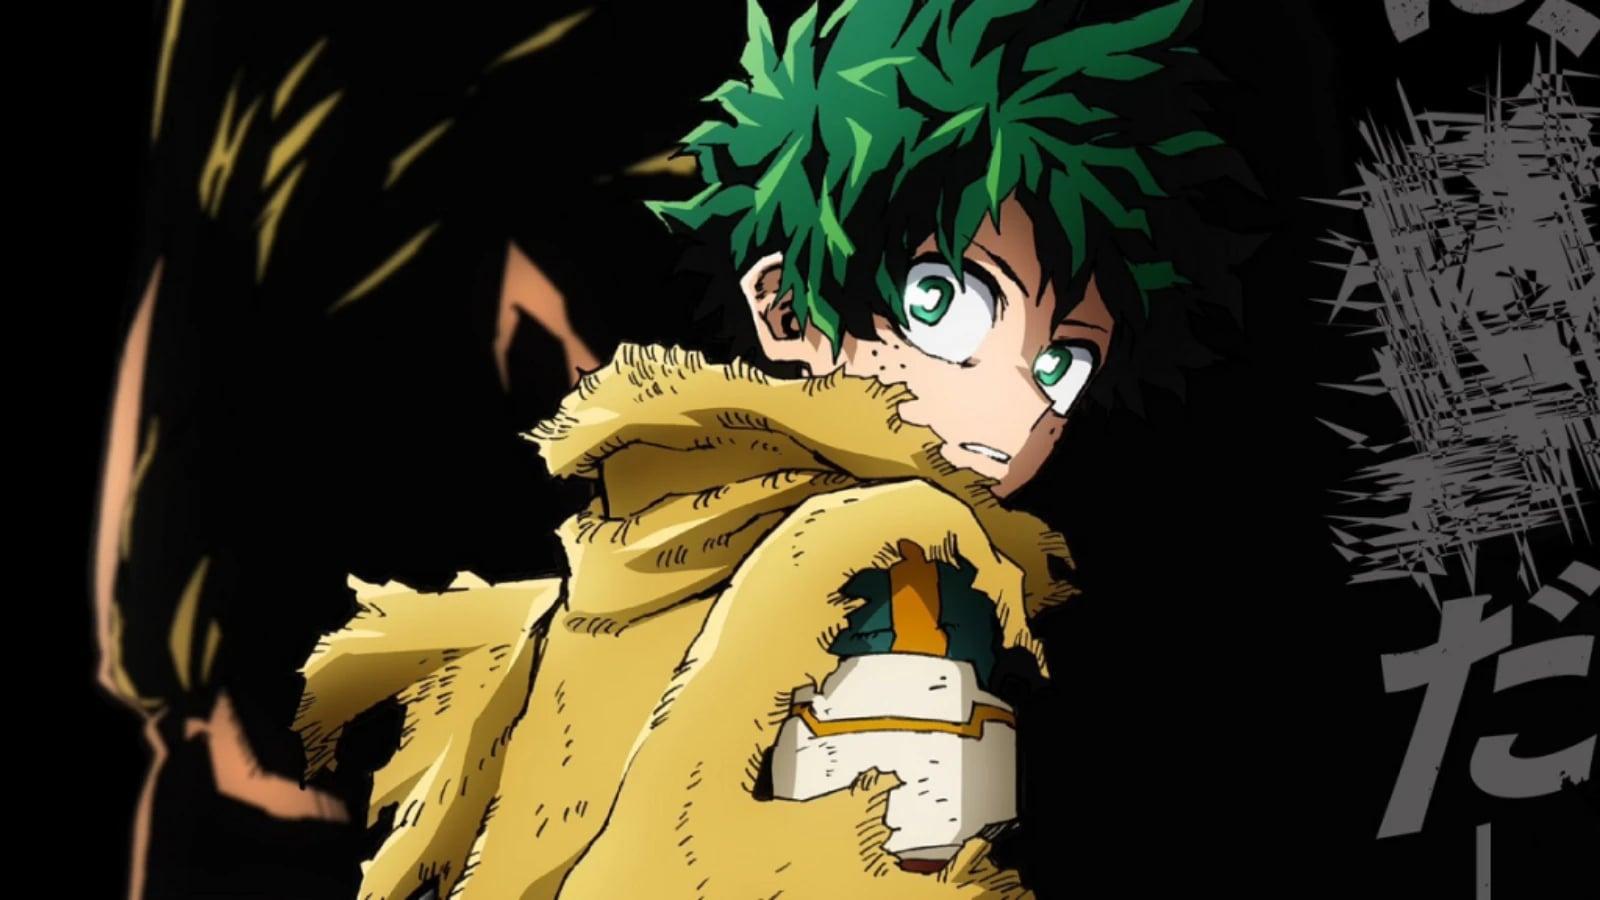 Deku in the My Hero Academia official release poster